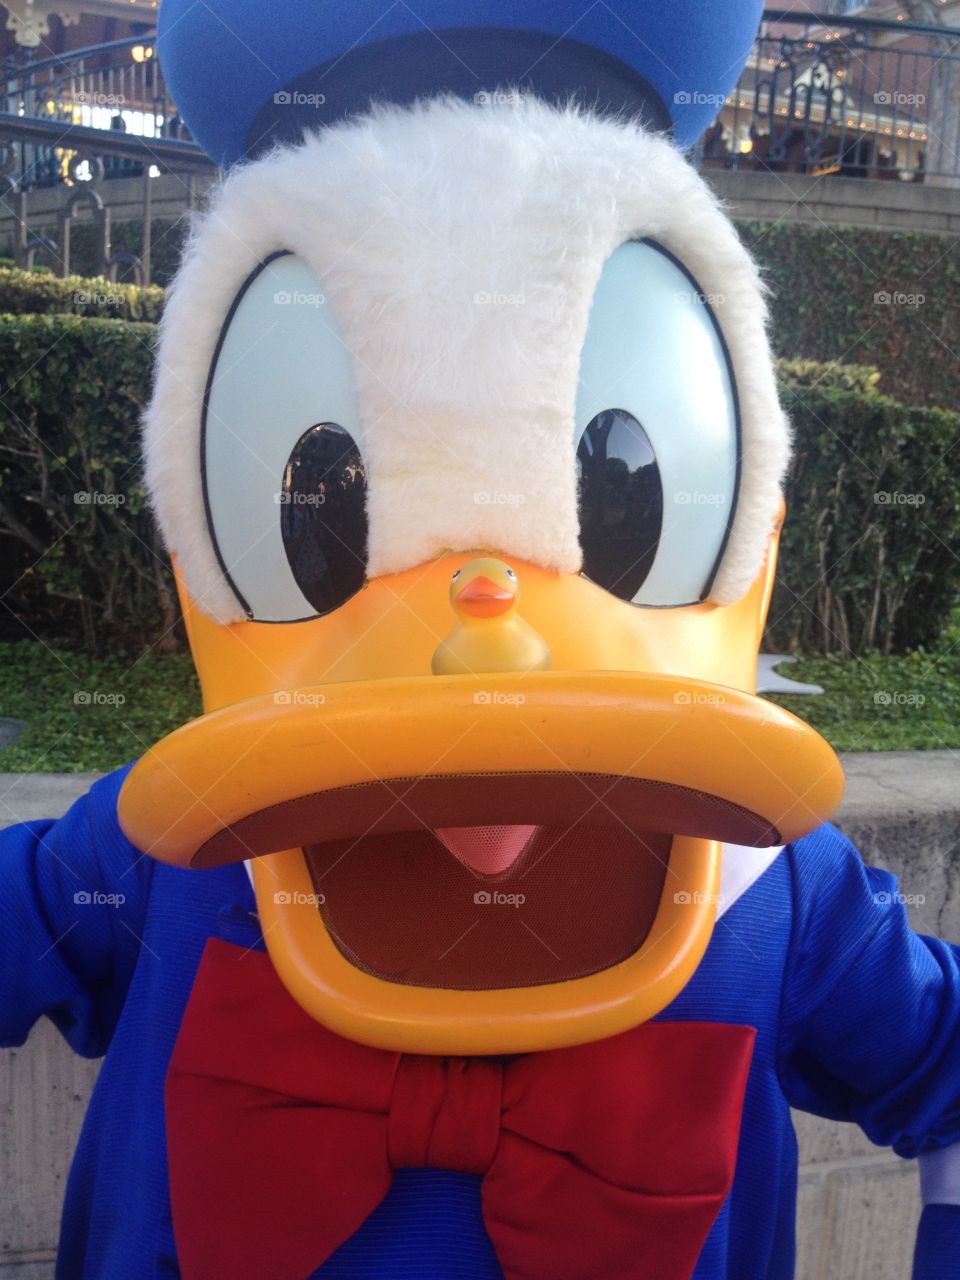 Donald Duck and friend